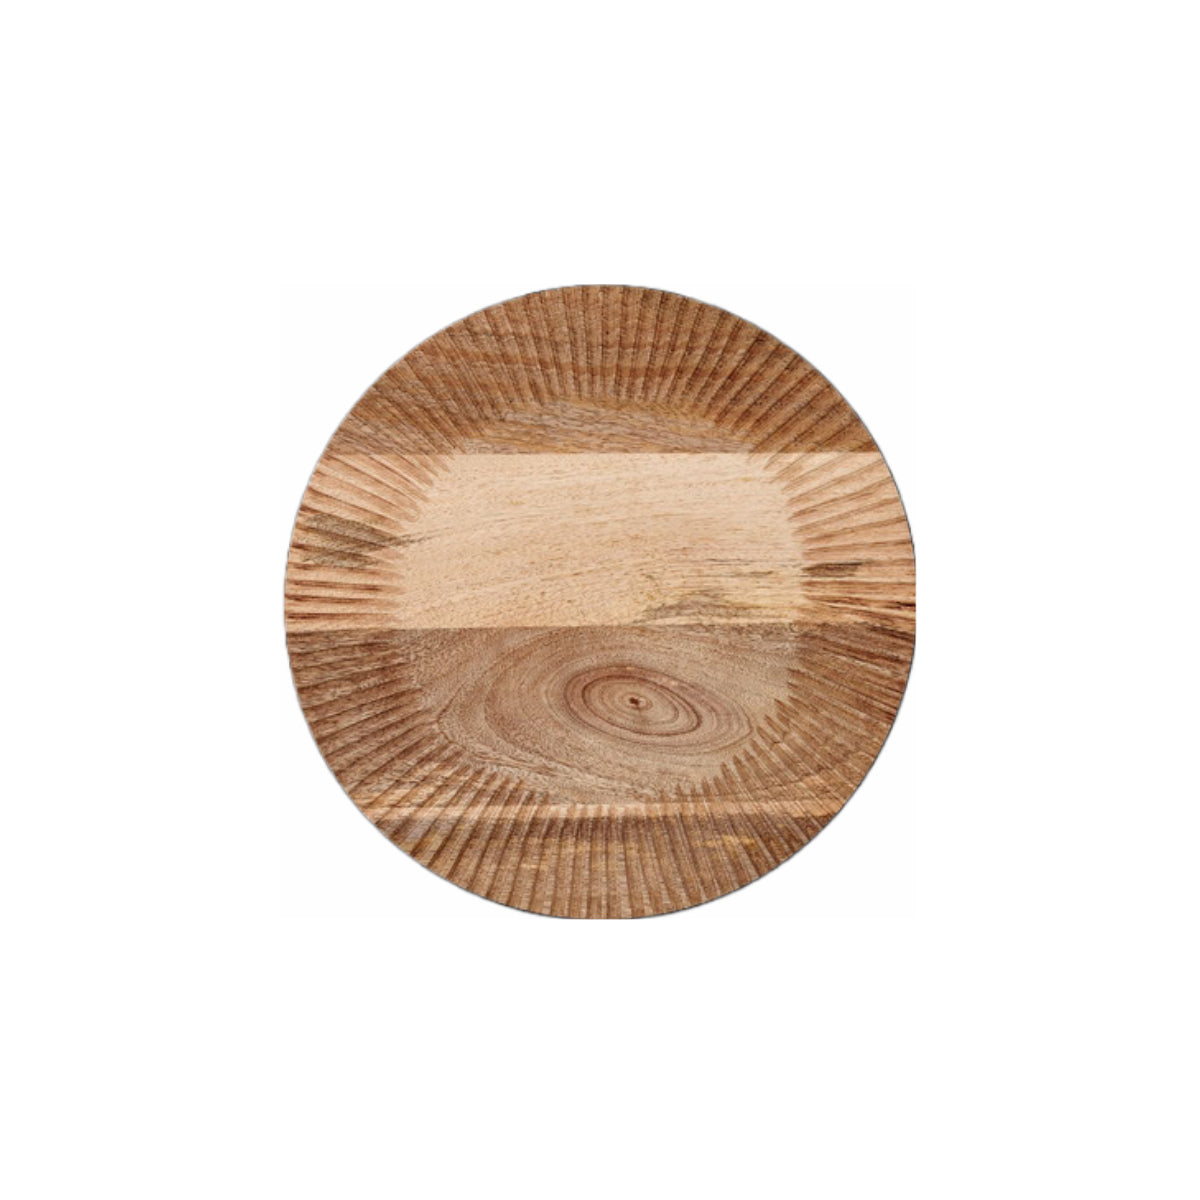 Round Chopping board cut out